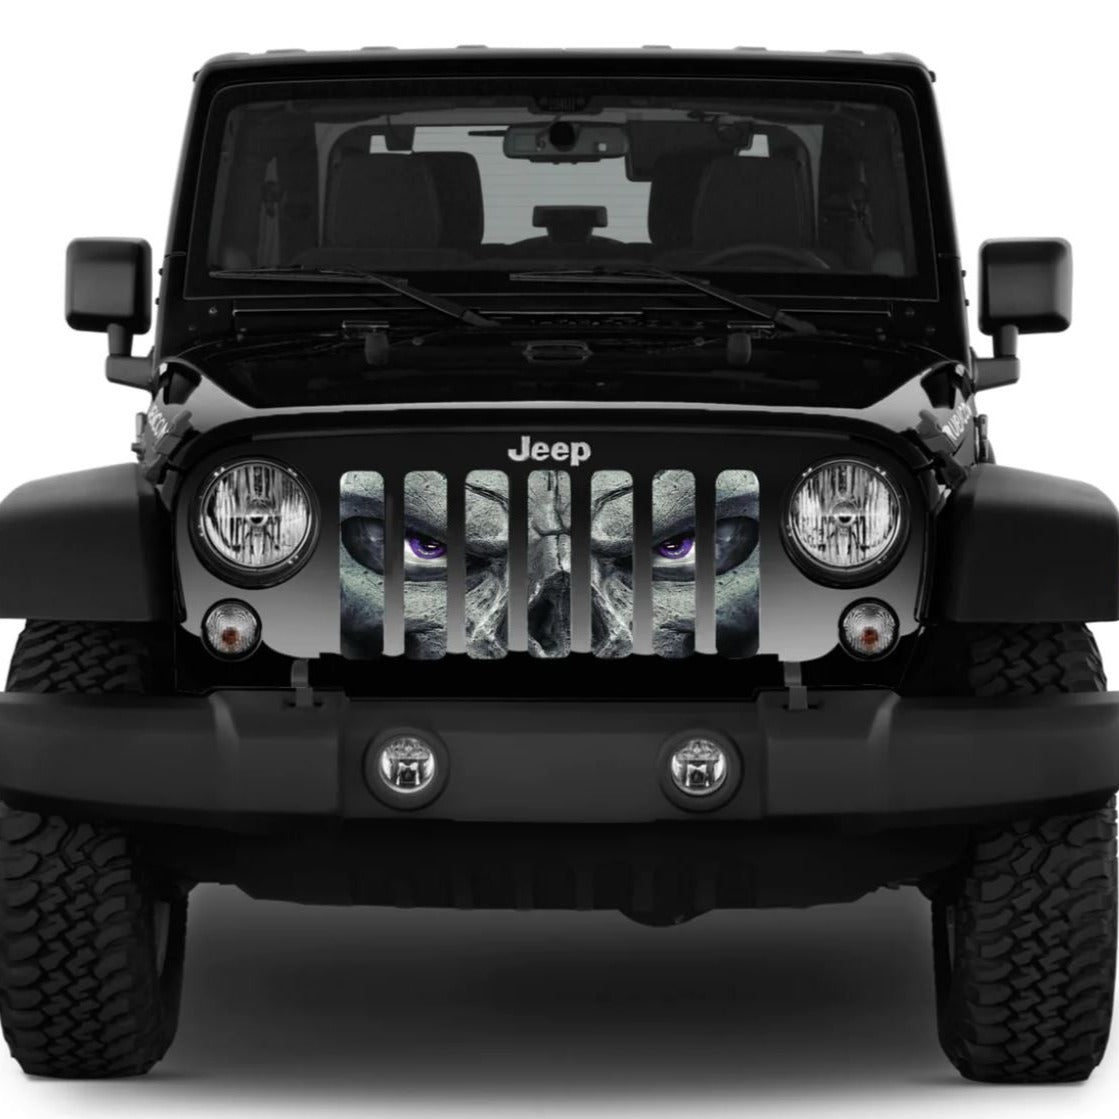 Black Jeep Wrangler showing a Jeep grille insert design of a skeleton face with purple eyes watching you. 